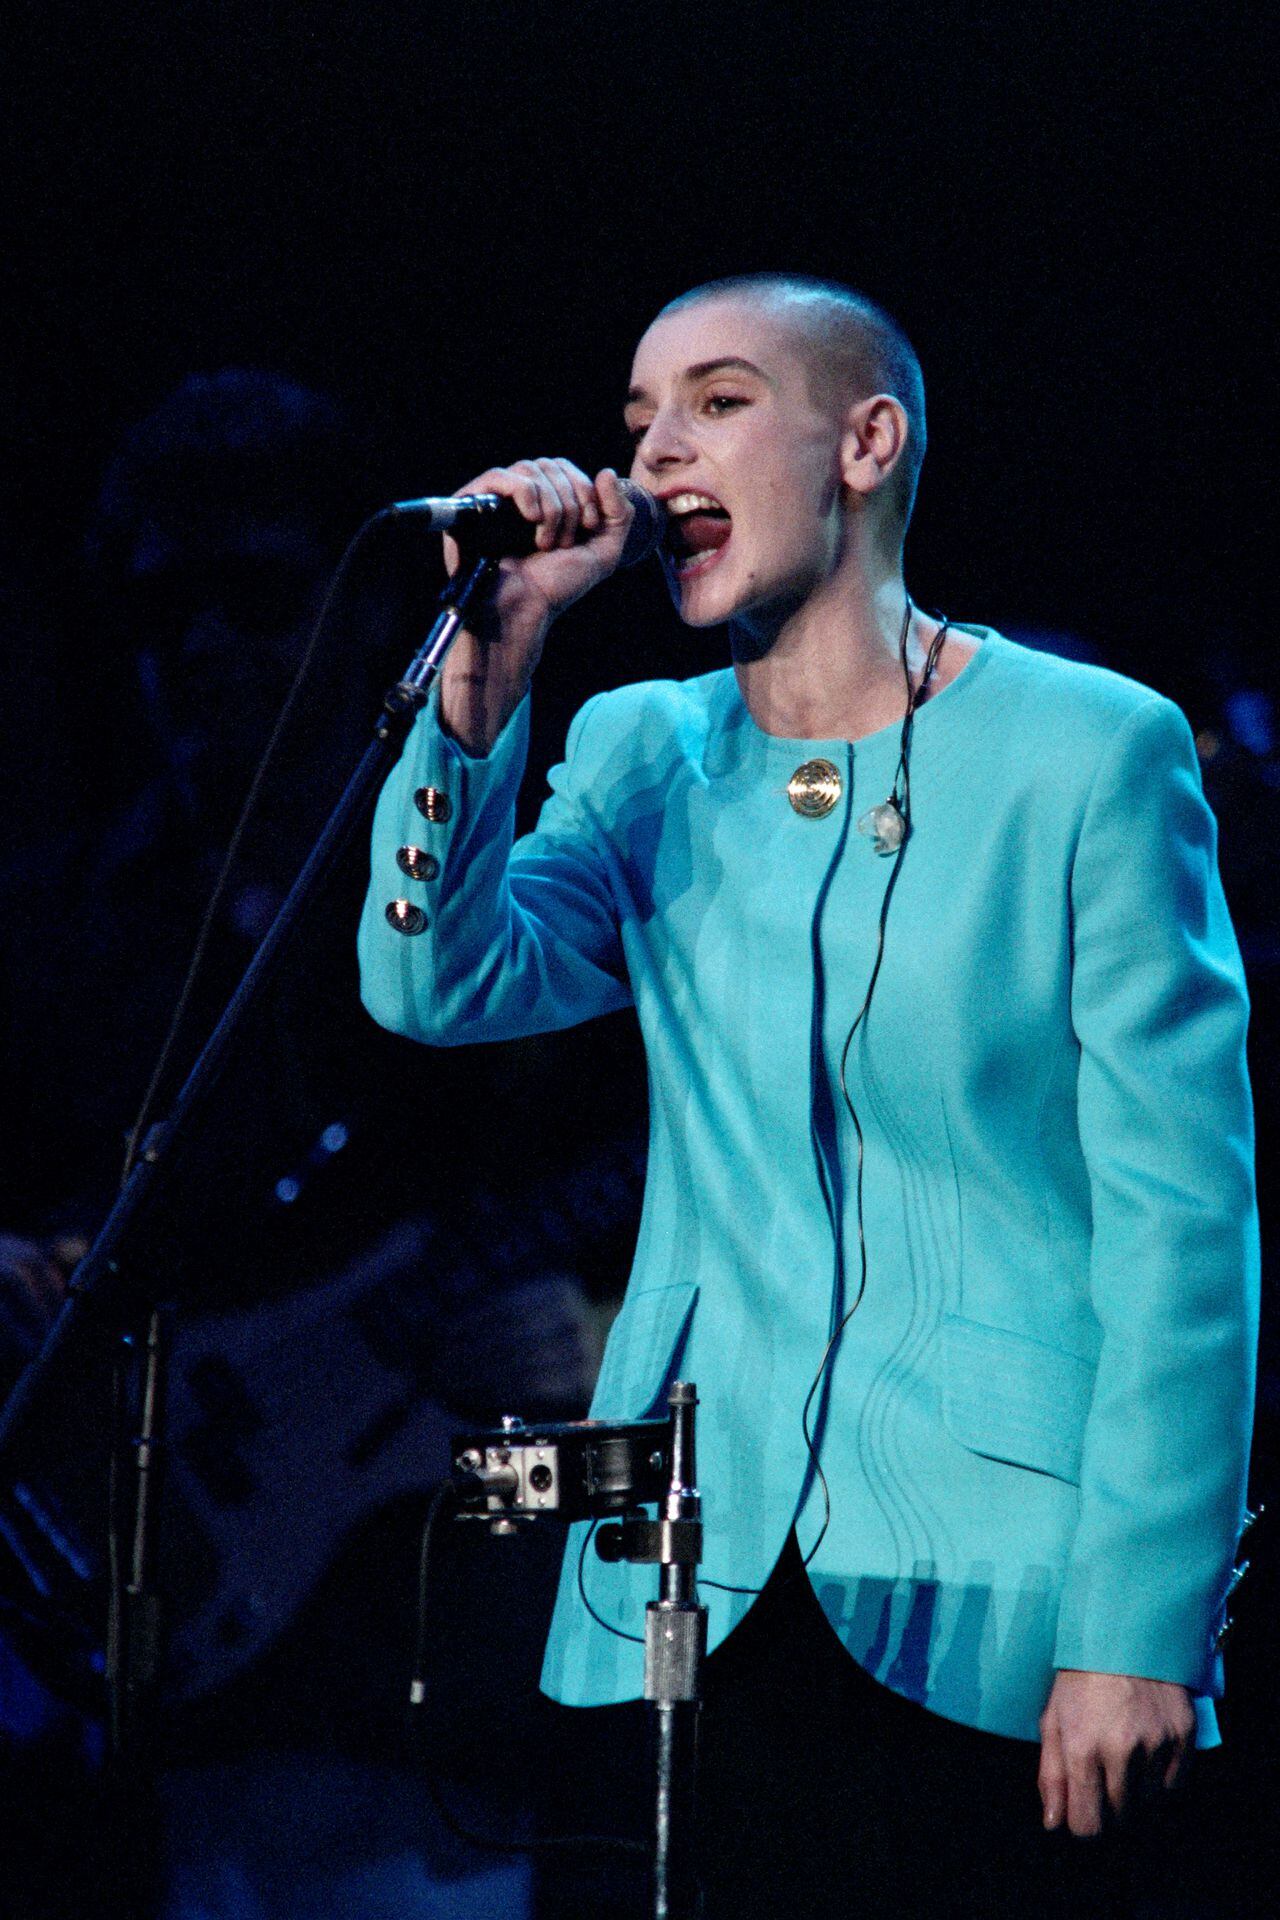 (FILES) Irish singer Sinead O'Connor performs at the Highline Ballroom in New York City on February 23, 2012. Irish pop singer Sinead O'Connor, who shot to fame in the 1990s, has died at the age of 56, Irish media reported on July 26, 2023. In a statement her family said it was with "great sadness that we announce the passing of our beloved Sinead. Her family and friends are devastated and have requested privacy at this very difficult time," Irish national broadcaster RTE reported. (Photo by Jason Kempin / GETTY IMAGES NORTH AMERICA / AFP)